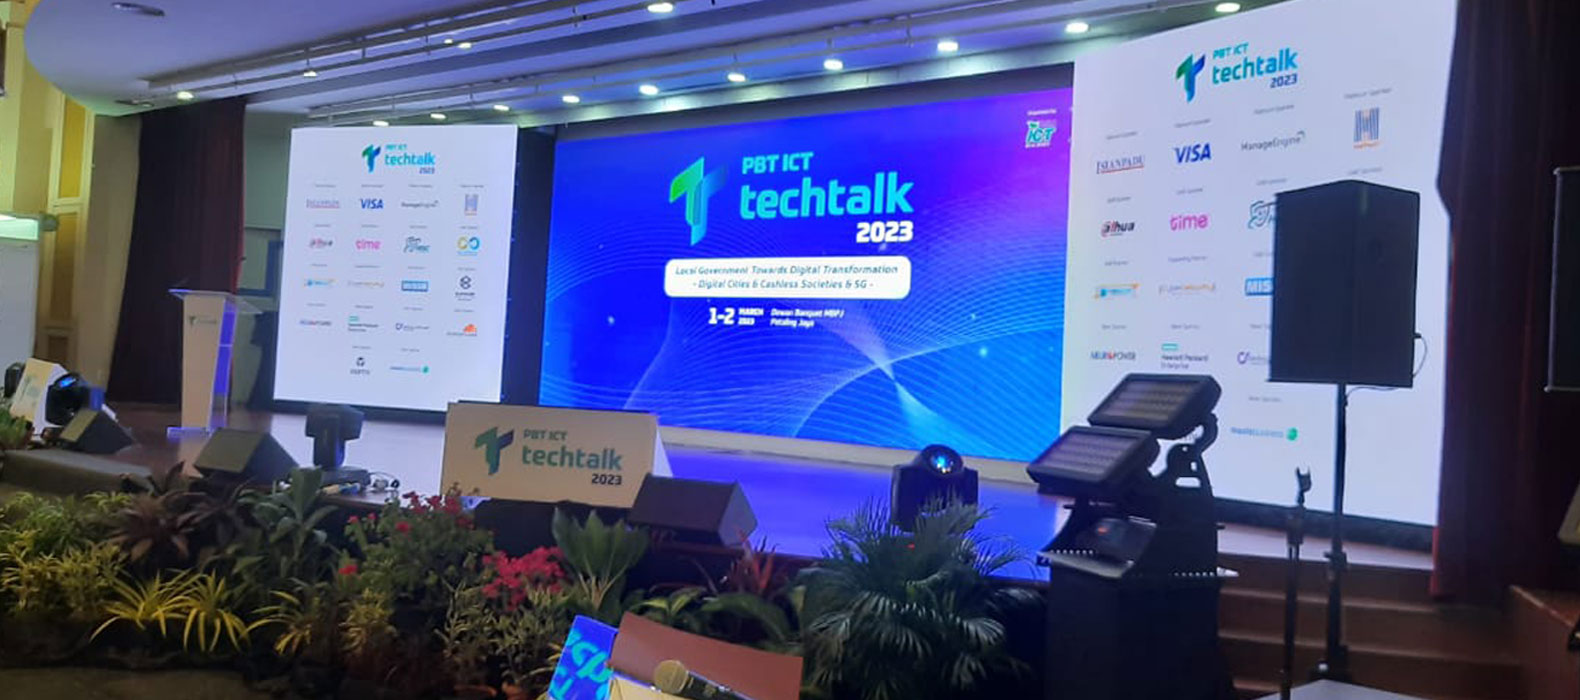 Lepton attend attend PBT ICT Tech Talk 2023 (formerly known as ICT PBT Malaysia Seminar) related to “Local Government Towards Digital Transformation - Digital Cities & Cashless Societies & 5G